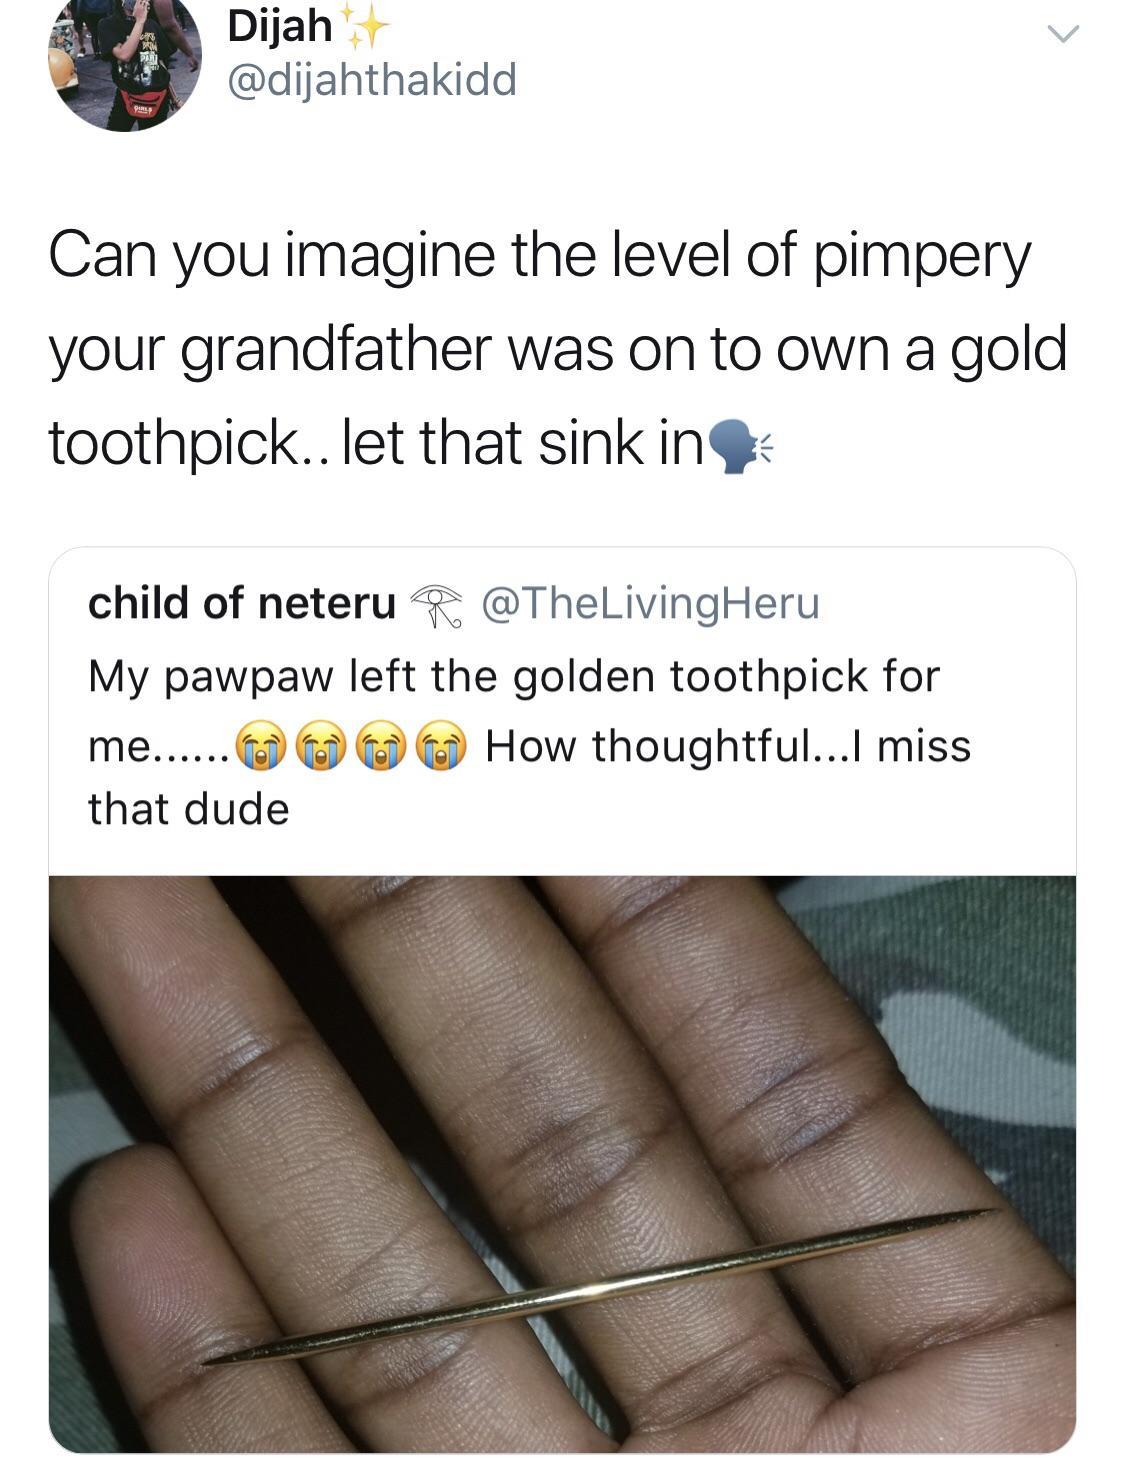 gold toothpick pimp - Dijah Carl Can you imagine the level of pimpery your grandfather was on to own a gold toothpick.. let that sink in child of neteru R My pawpaw left the golden toothpick for me..... How thoughtful...I miss that dude